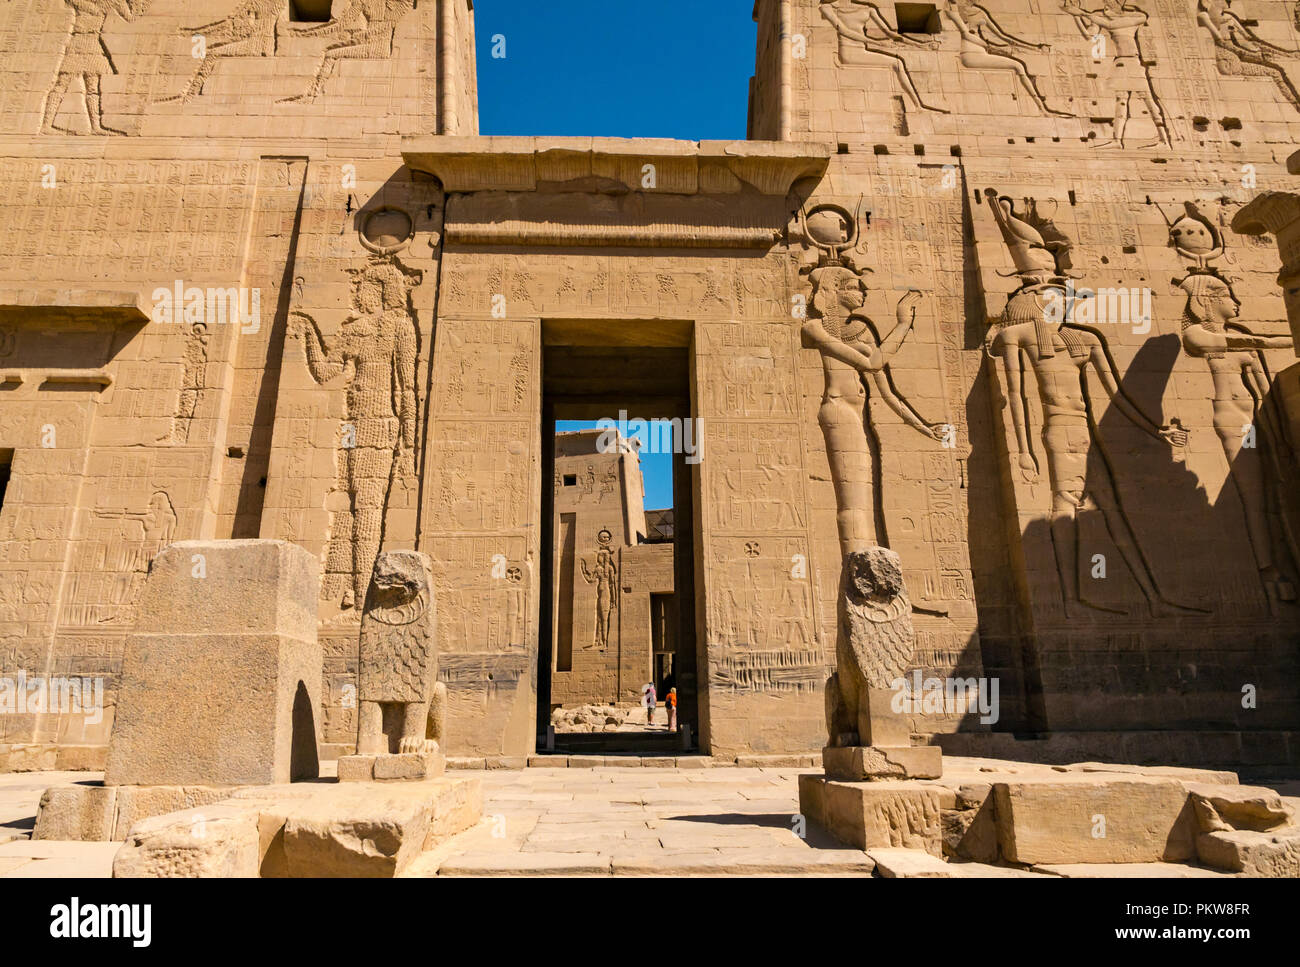 Outer pylon and gateway with carved Egyptian figures and hieroglyphs, Temple of Philae, Agilkia Island, River Nile, Aswan, Egypt, Africa Stock Photo